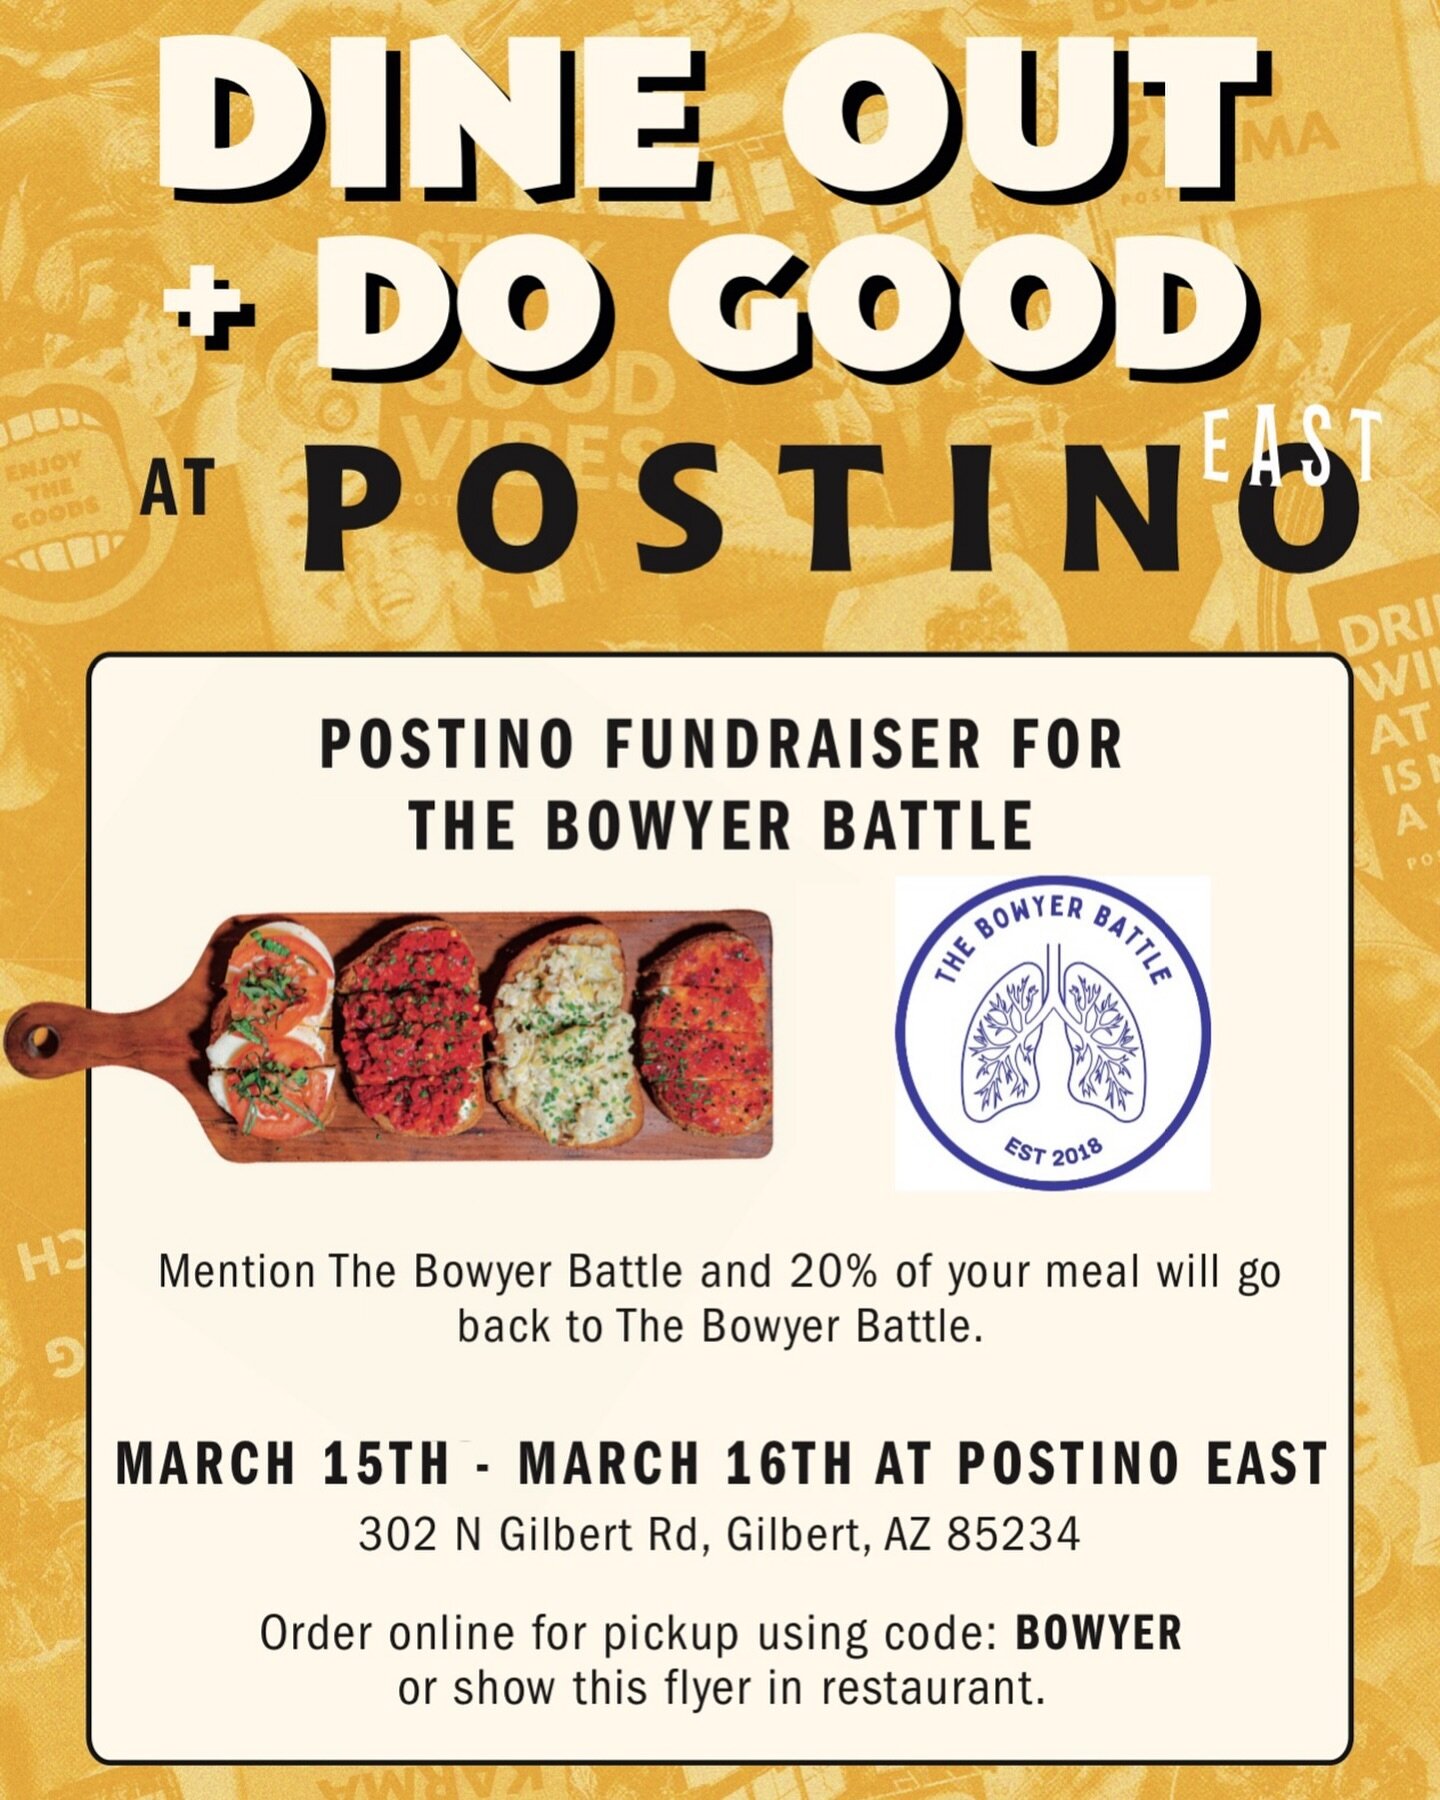 Who doesn&rsquo;t love an excuse to socialize, wine, dine &amp; give back all at the same time?! This Friday &amp; Saturday, Gilbert @postinowinecafe is giving back 20% of your entire bill when you mention THE BOWYER BATTLE. 

Happy noshing friends!